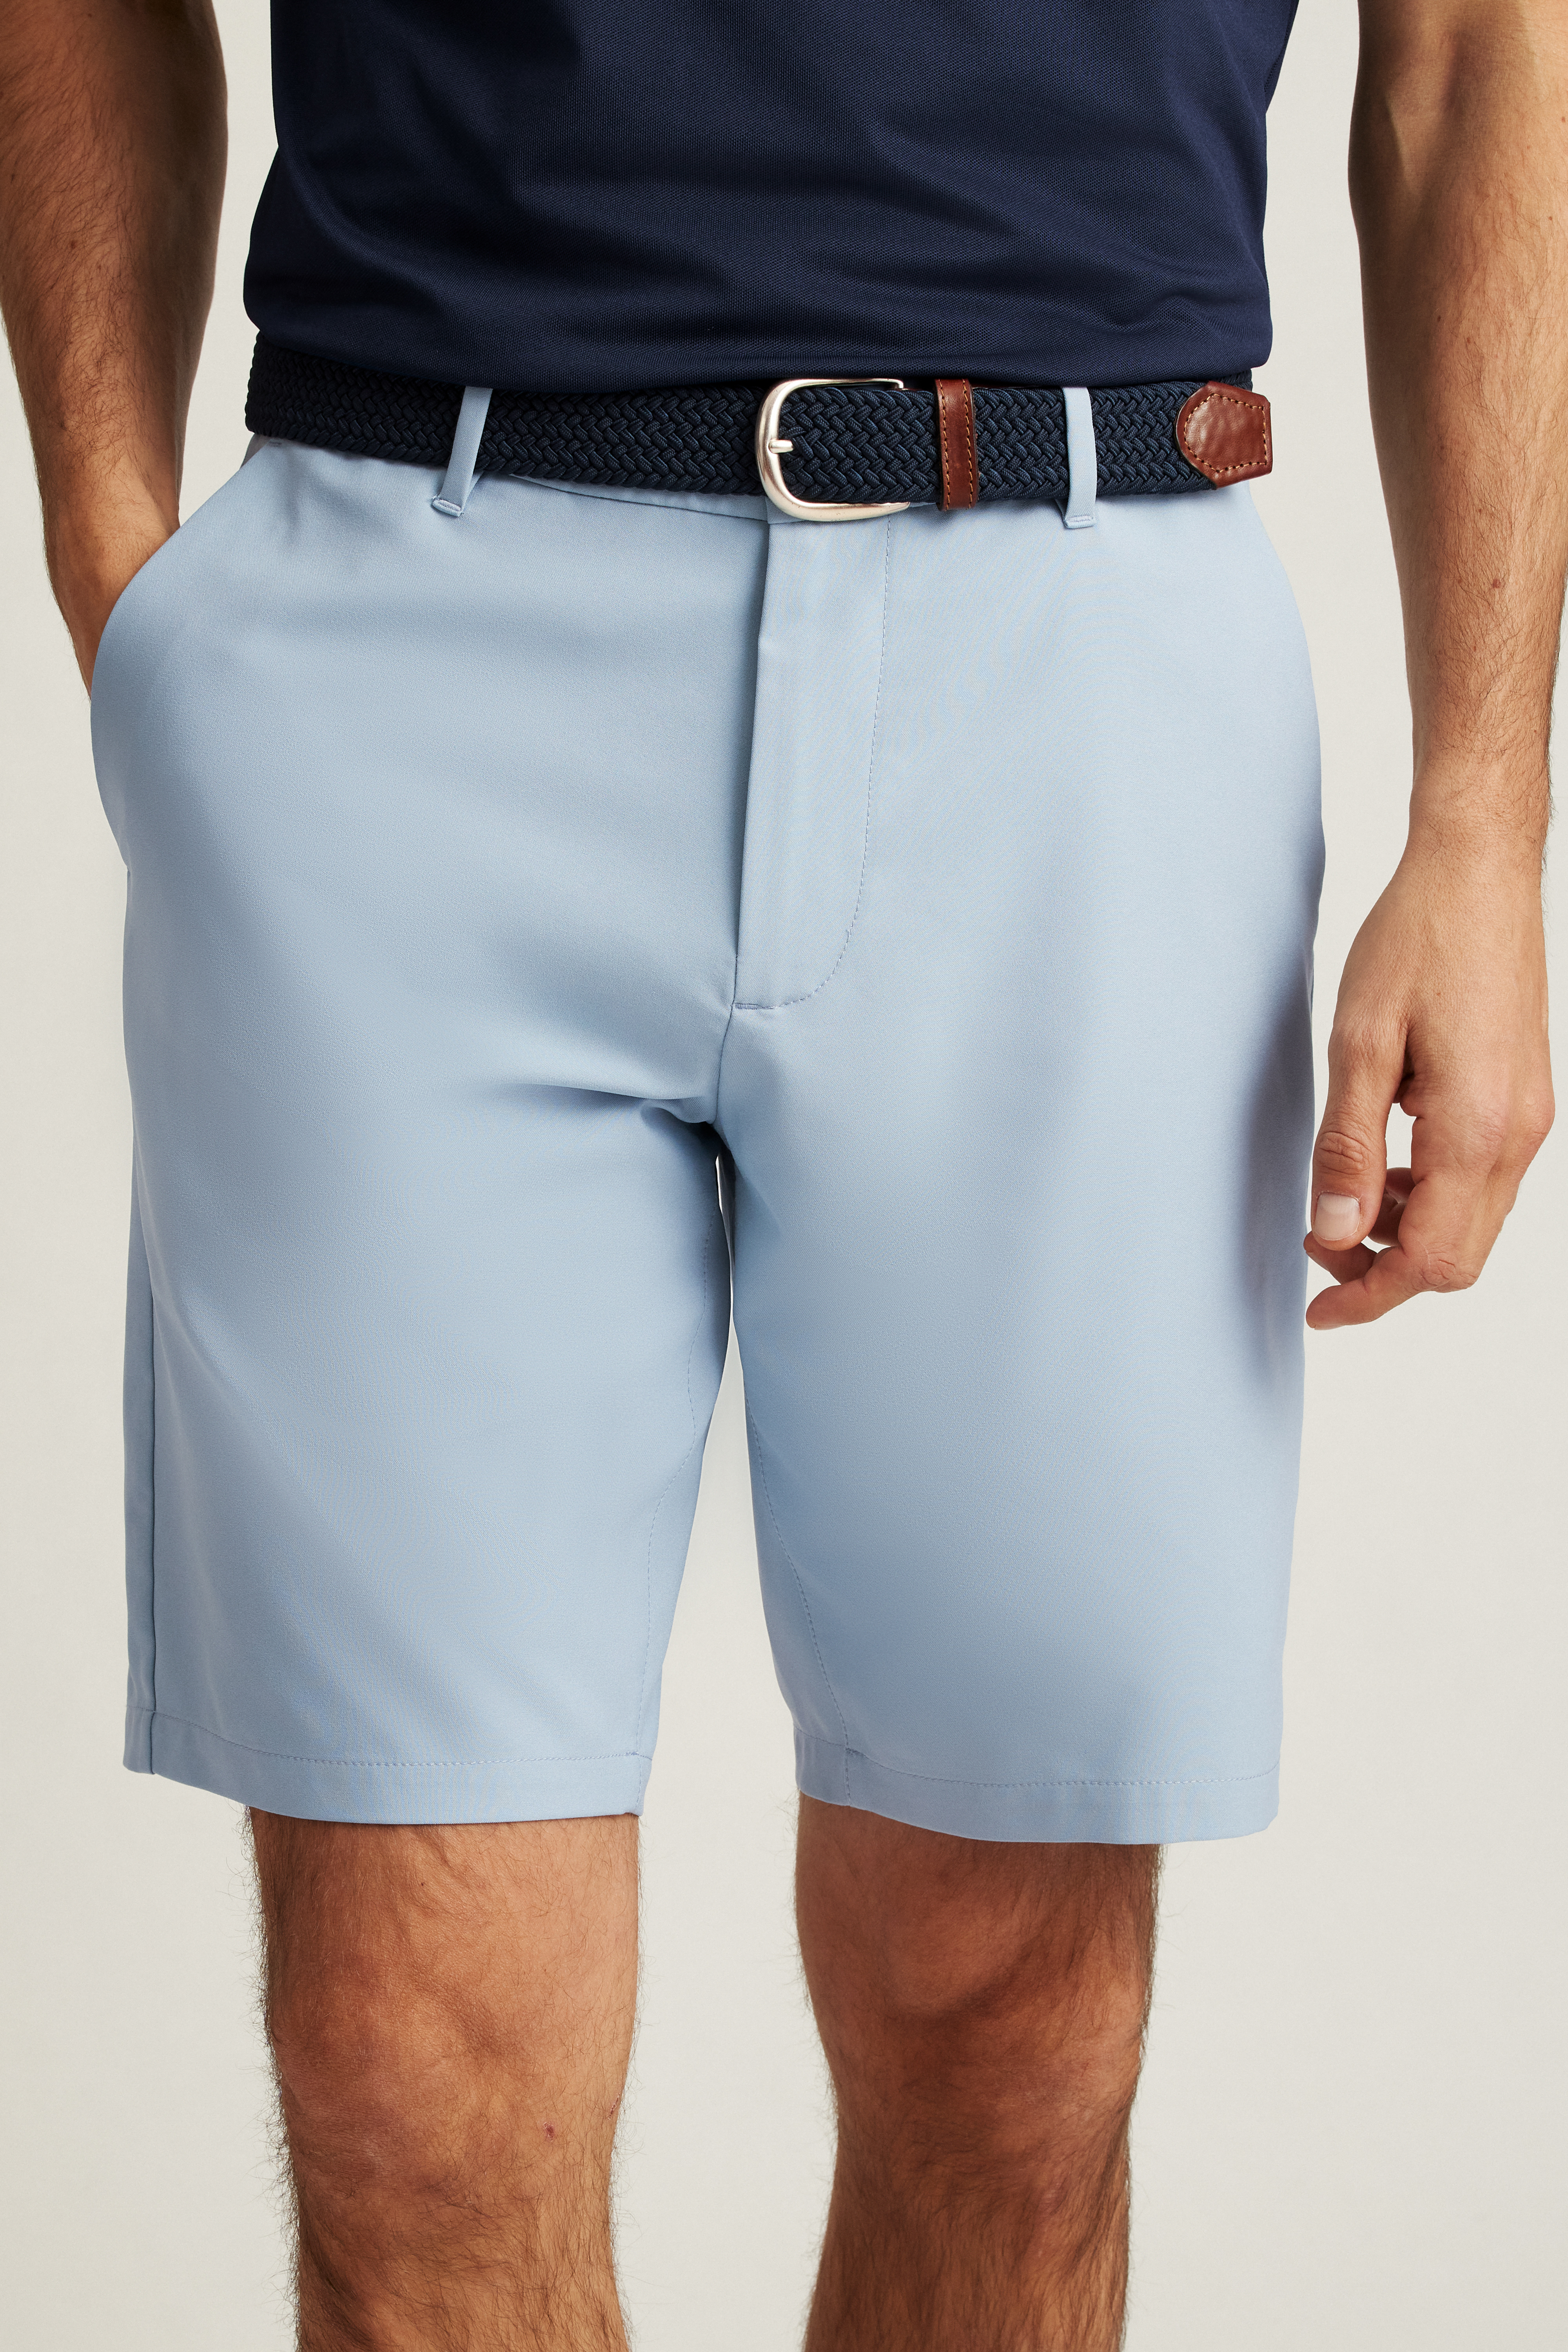 Tee Off with Golf Shorts for Men